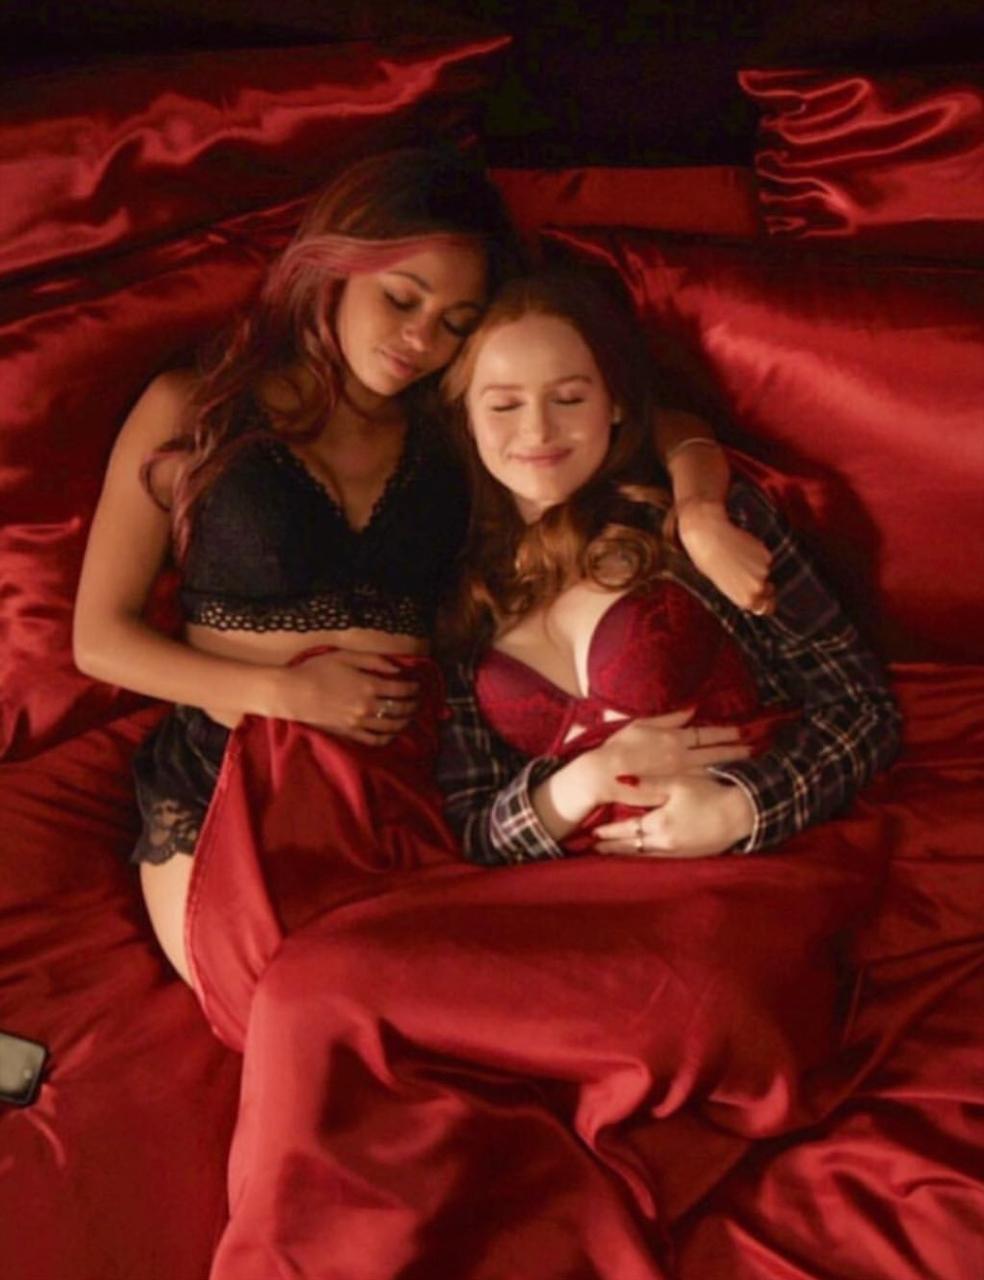 image about choni. See more about riverdale